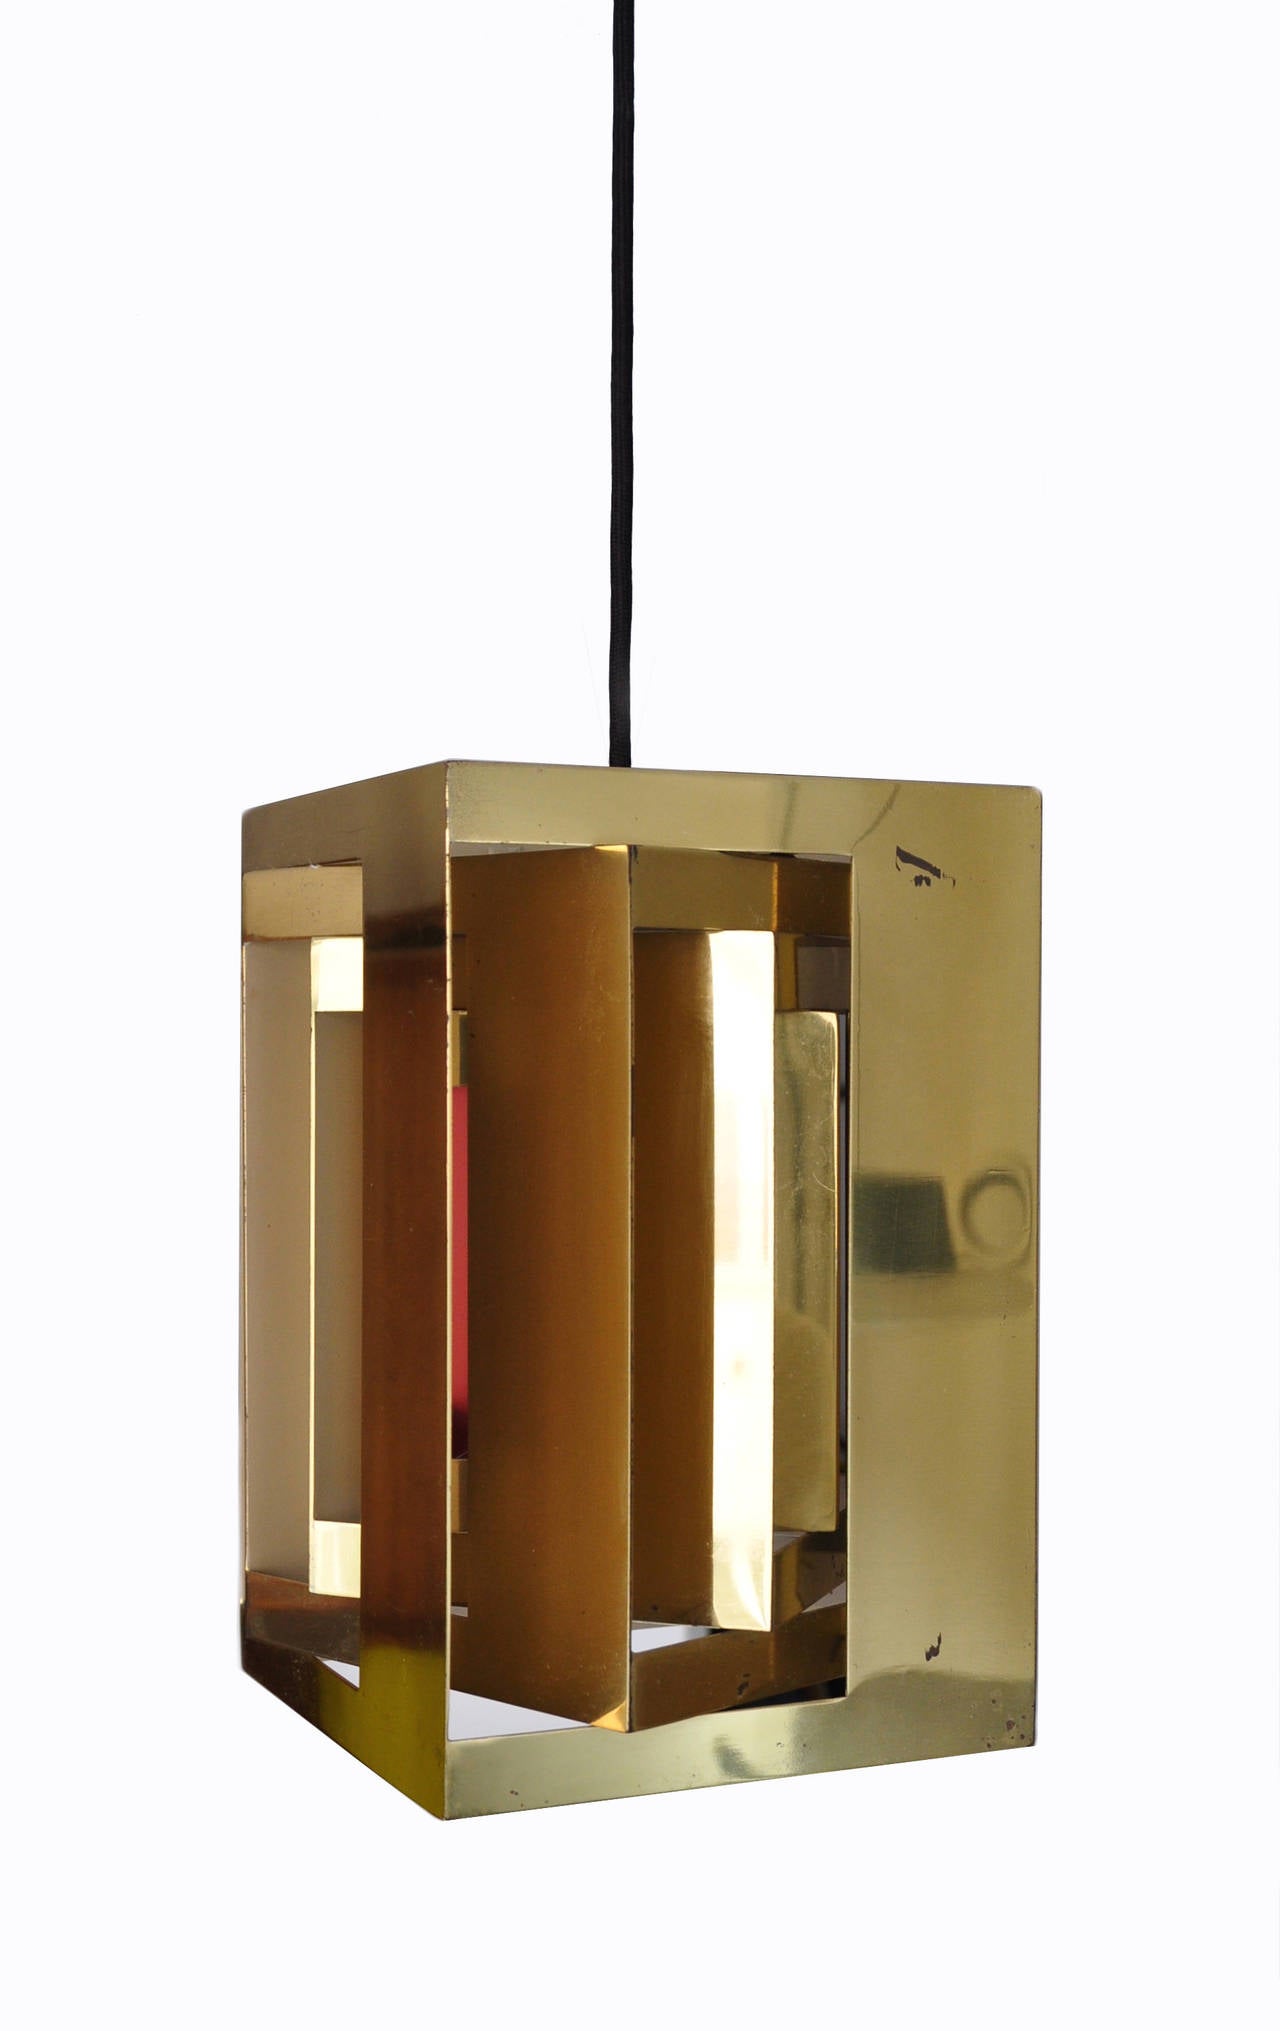 Designed by Simon Henningsen (1920-1974) in 1963-65 and manufactured by Lyfa. The brass 